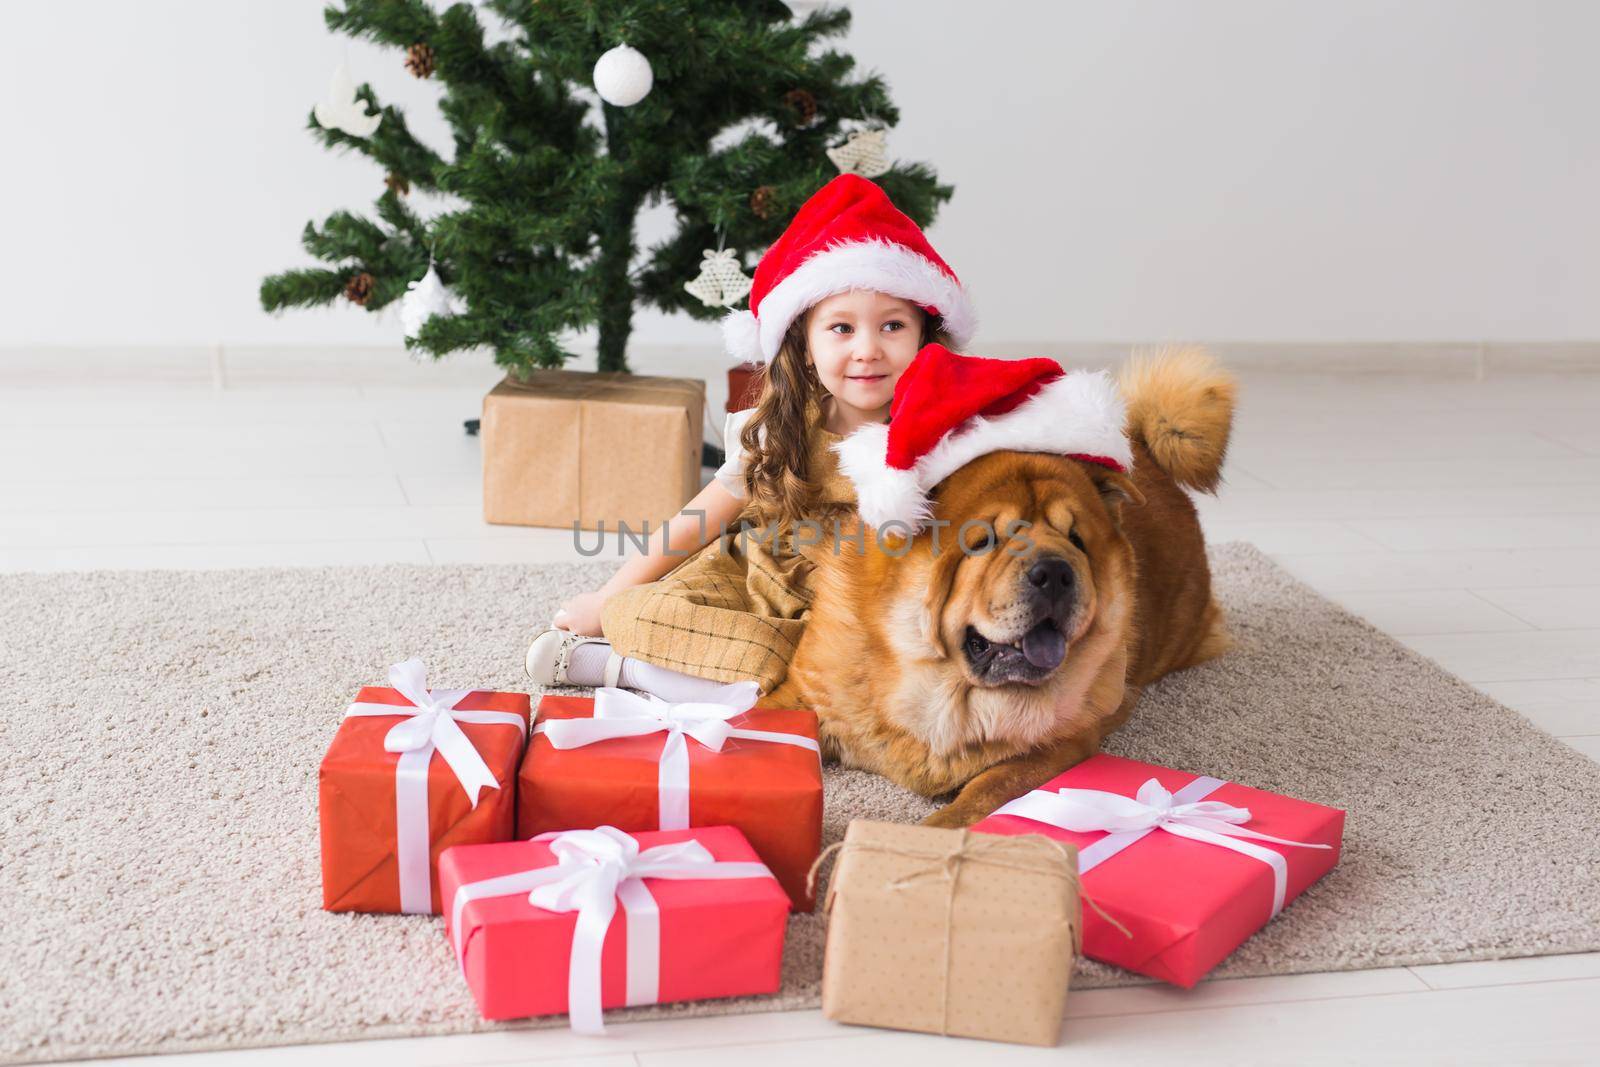 Children and pet concept - Cute girl with dog sitting near the Christmas tree. Merry Christmas and Happy Holidays